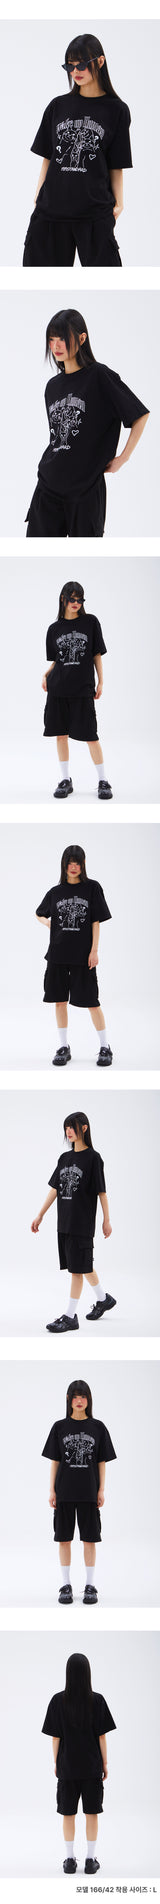 WAKE UP Cool Cotton Overfit Short Sleeves(SISSTD-0053)